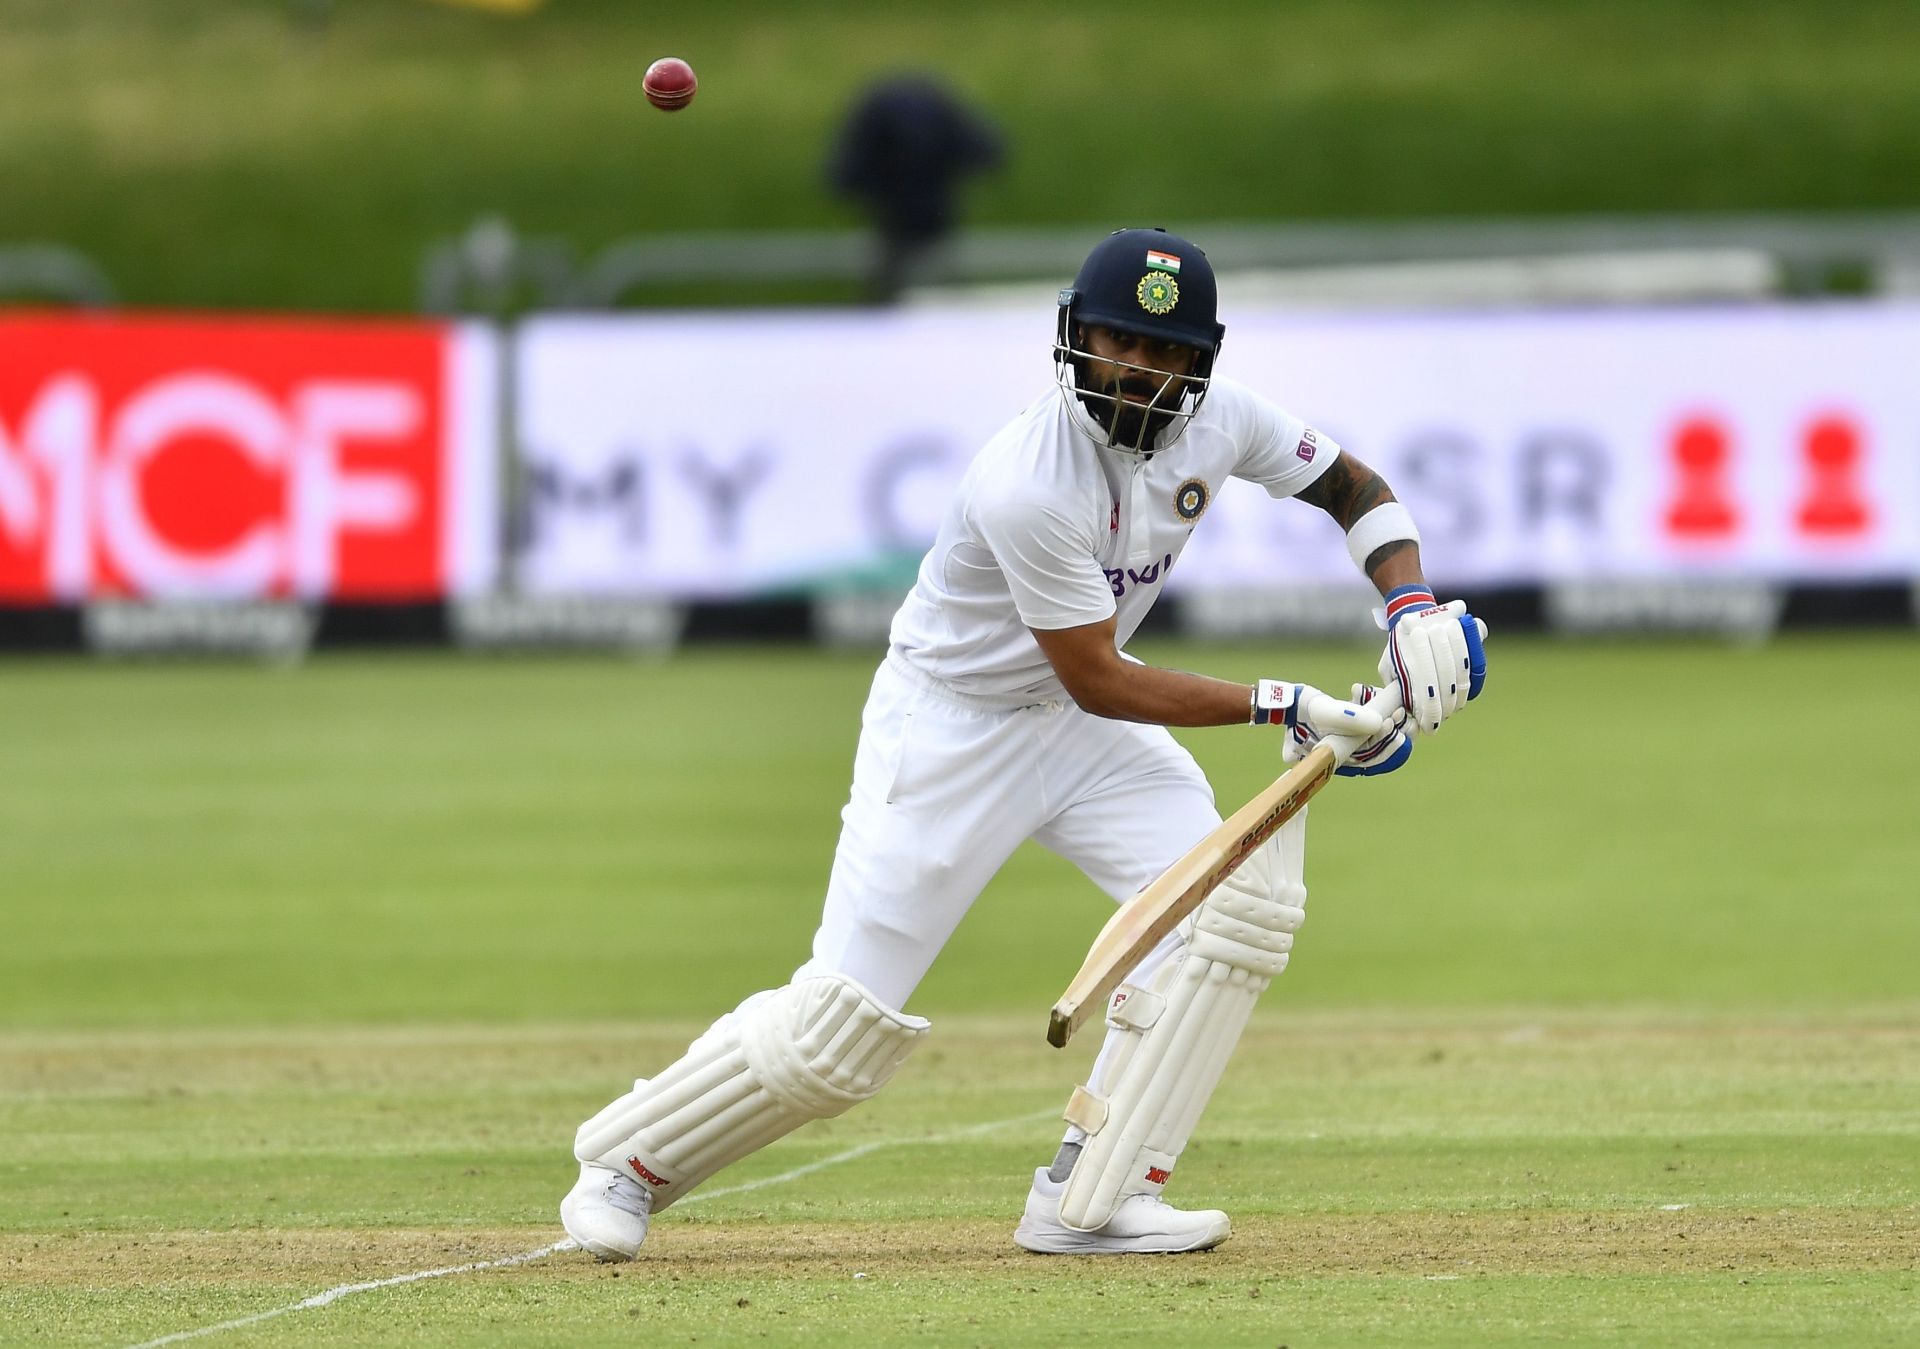 Virat Kohli has played a top-quality knock against South Africa at Newlands so far.